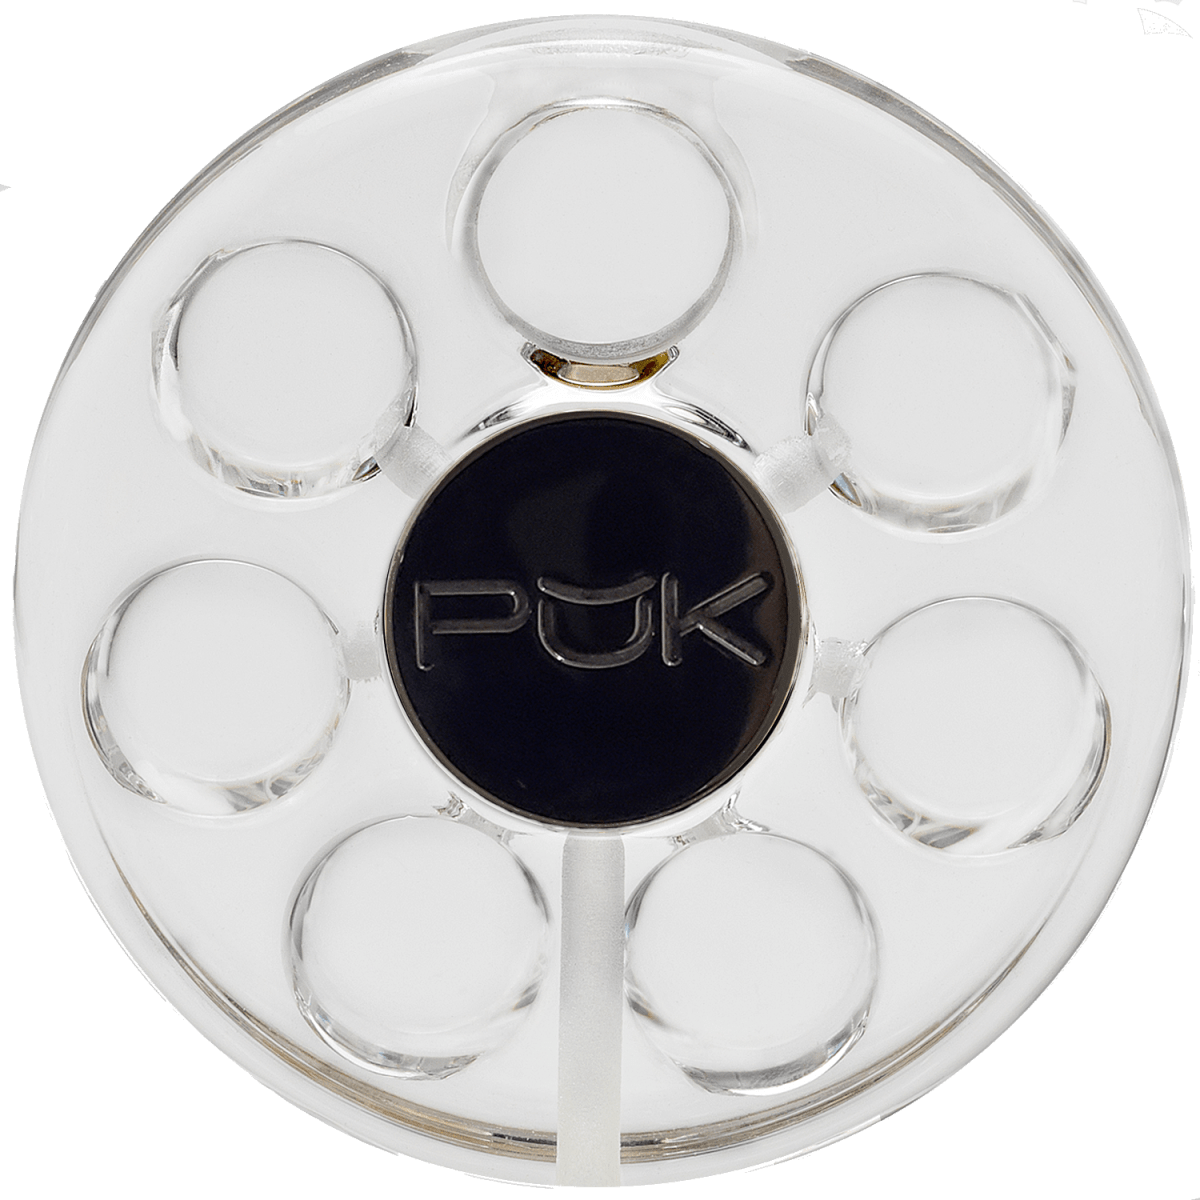 PUK ONLINE STORE Glass PŬK with Black Center Glass PŬK Cannabis Container and Smoking Device